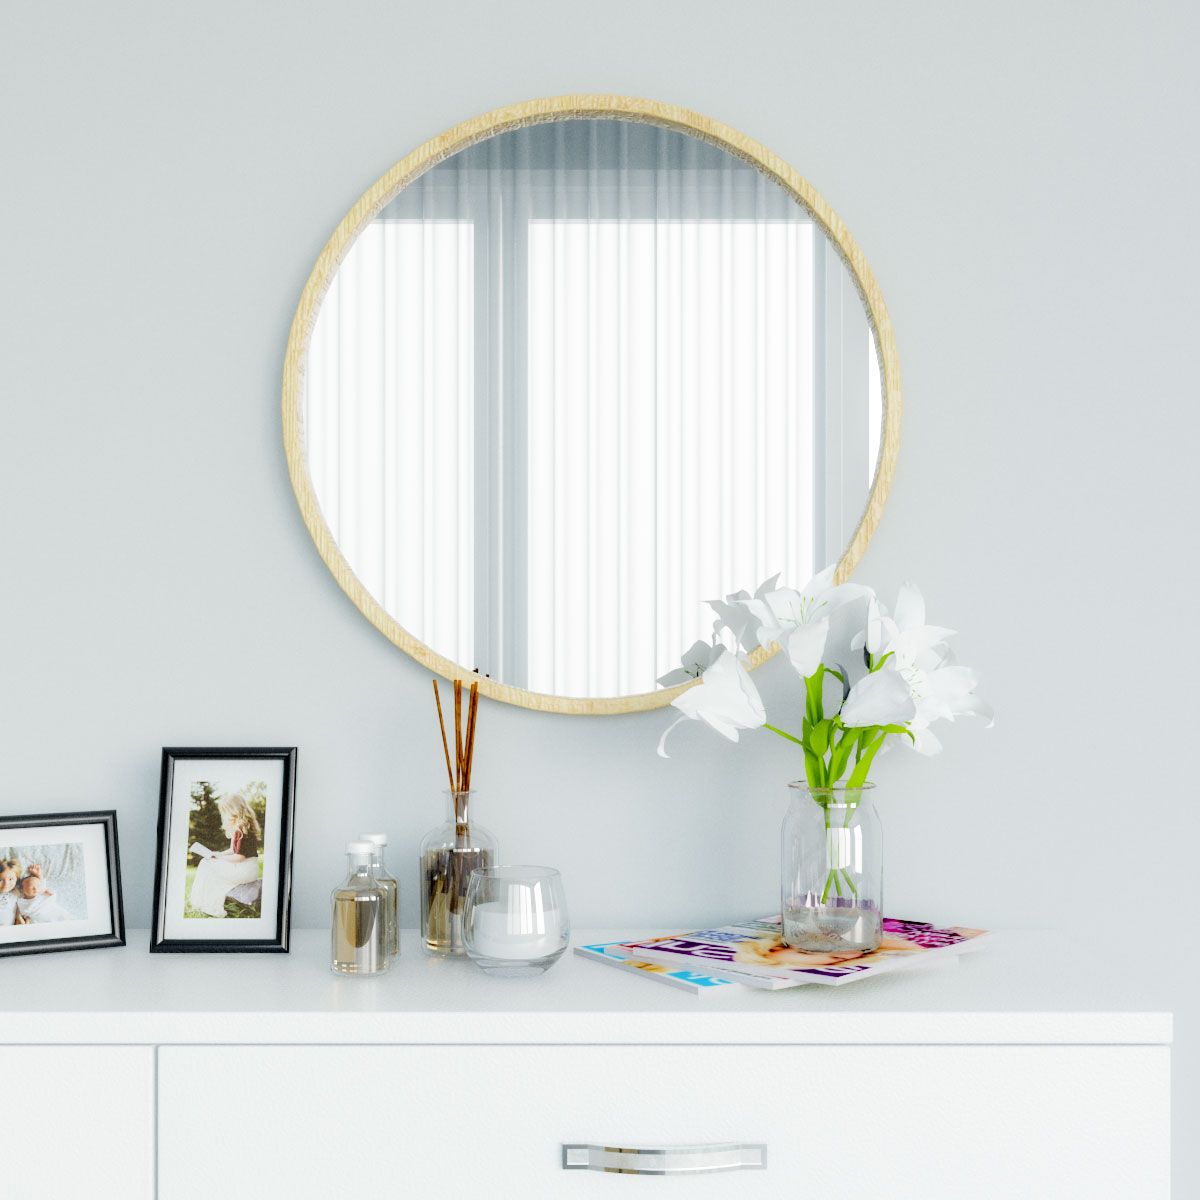 10 Best Round Wall Mirror In 2020 – Roomdsign With Round Grid Wall Mirrors (View 9 of 15)